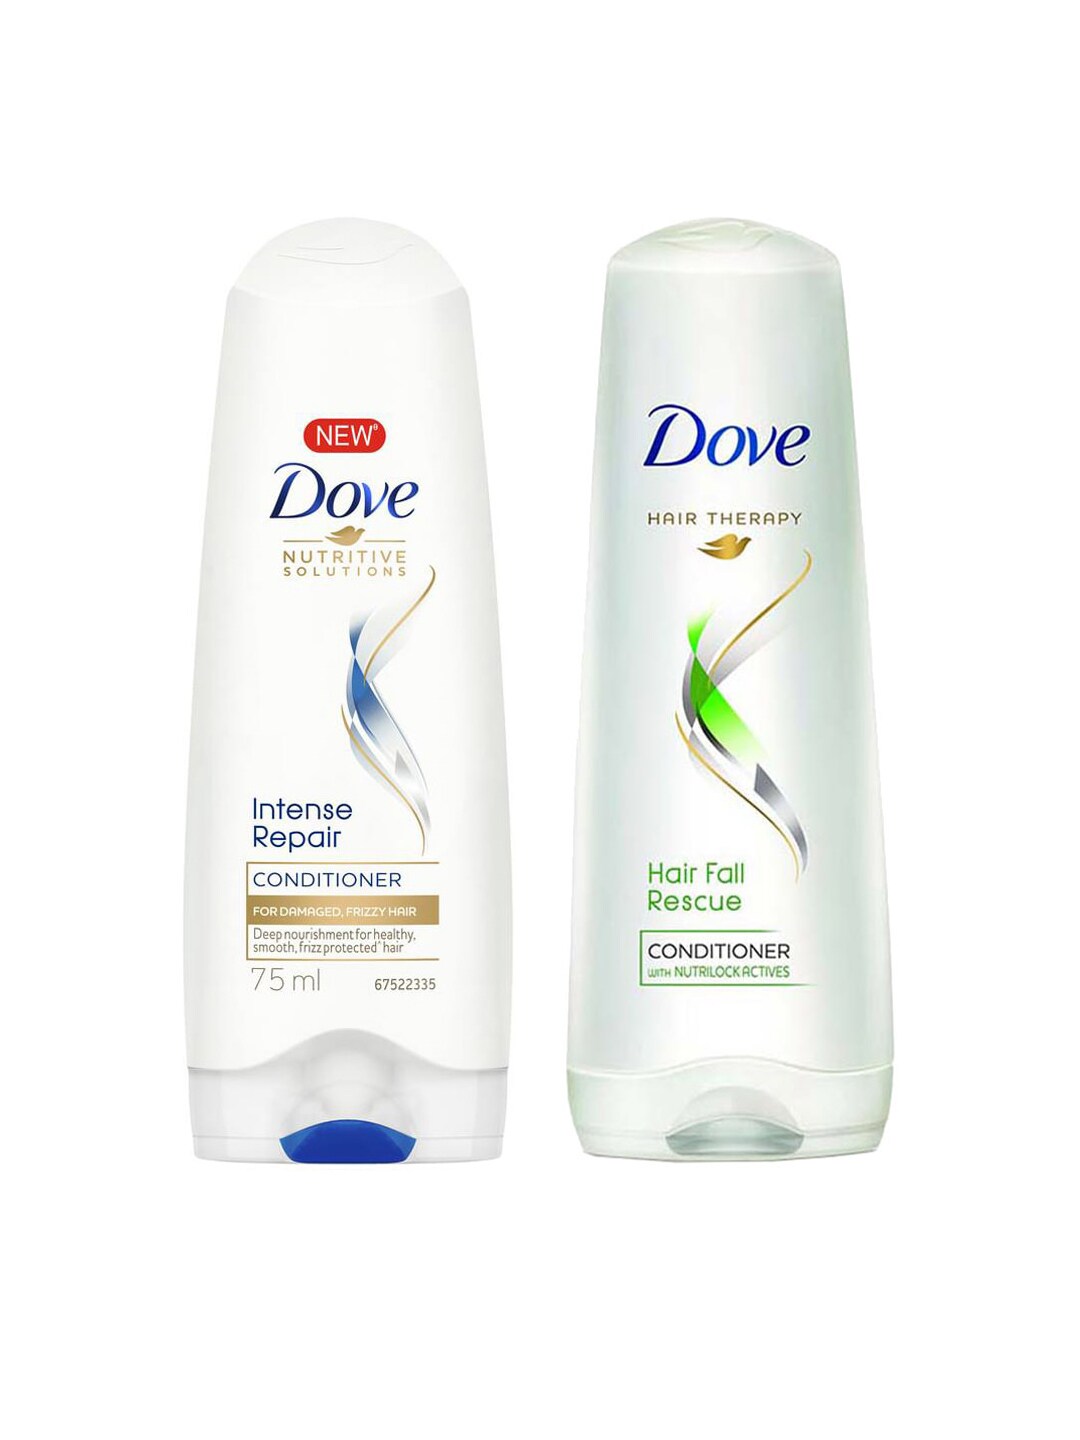 Dove Hair Therapy Hair Fall Rescue Conditioner & Unisex Intense Repair Conditioner Price in India